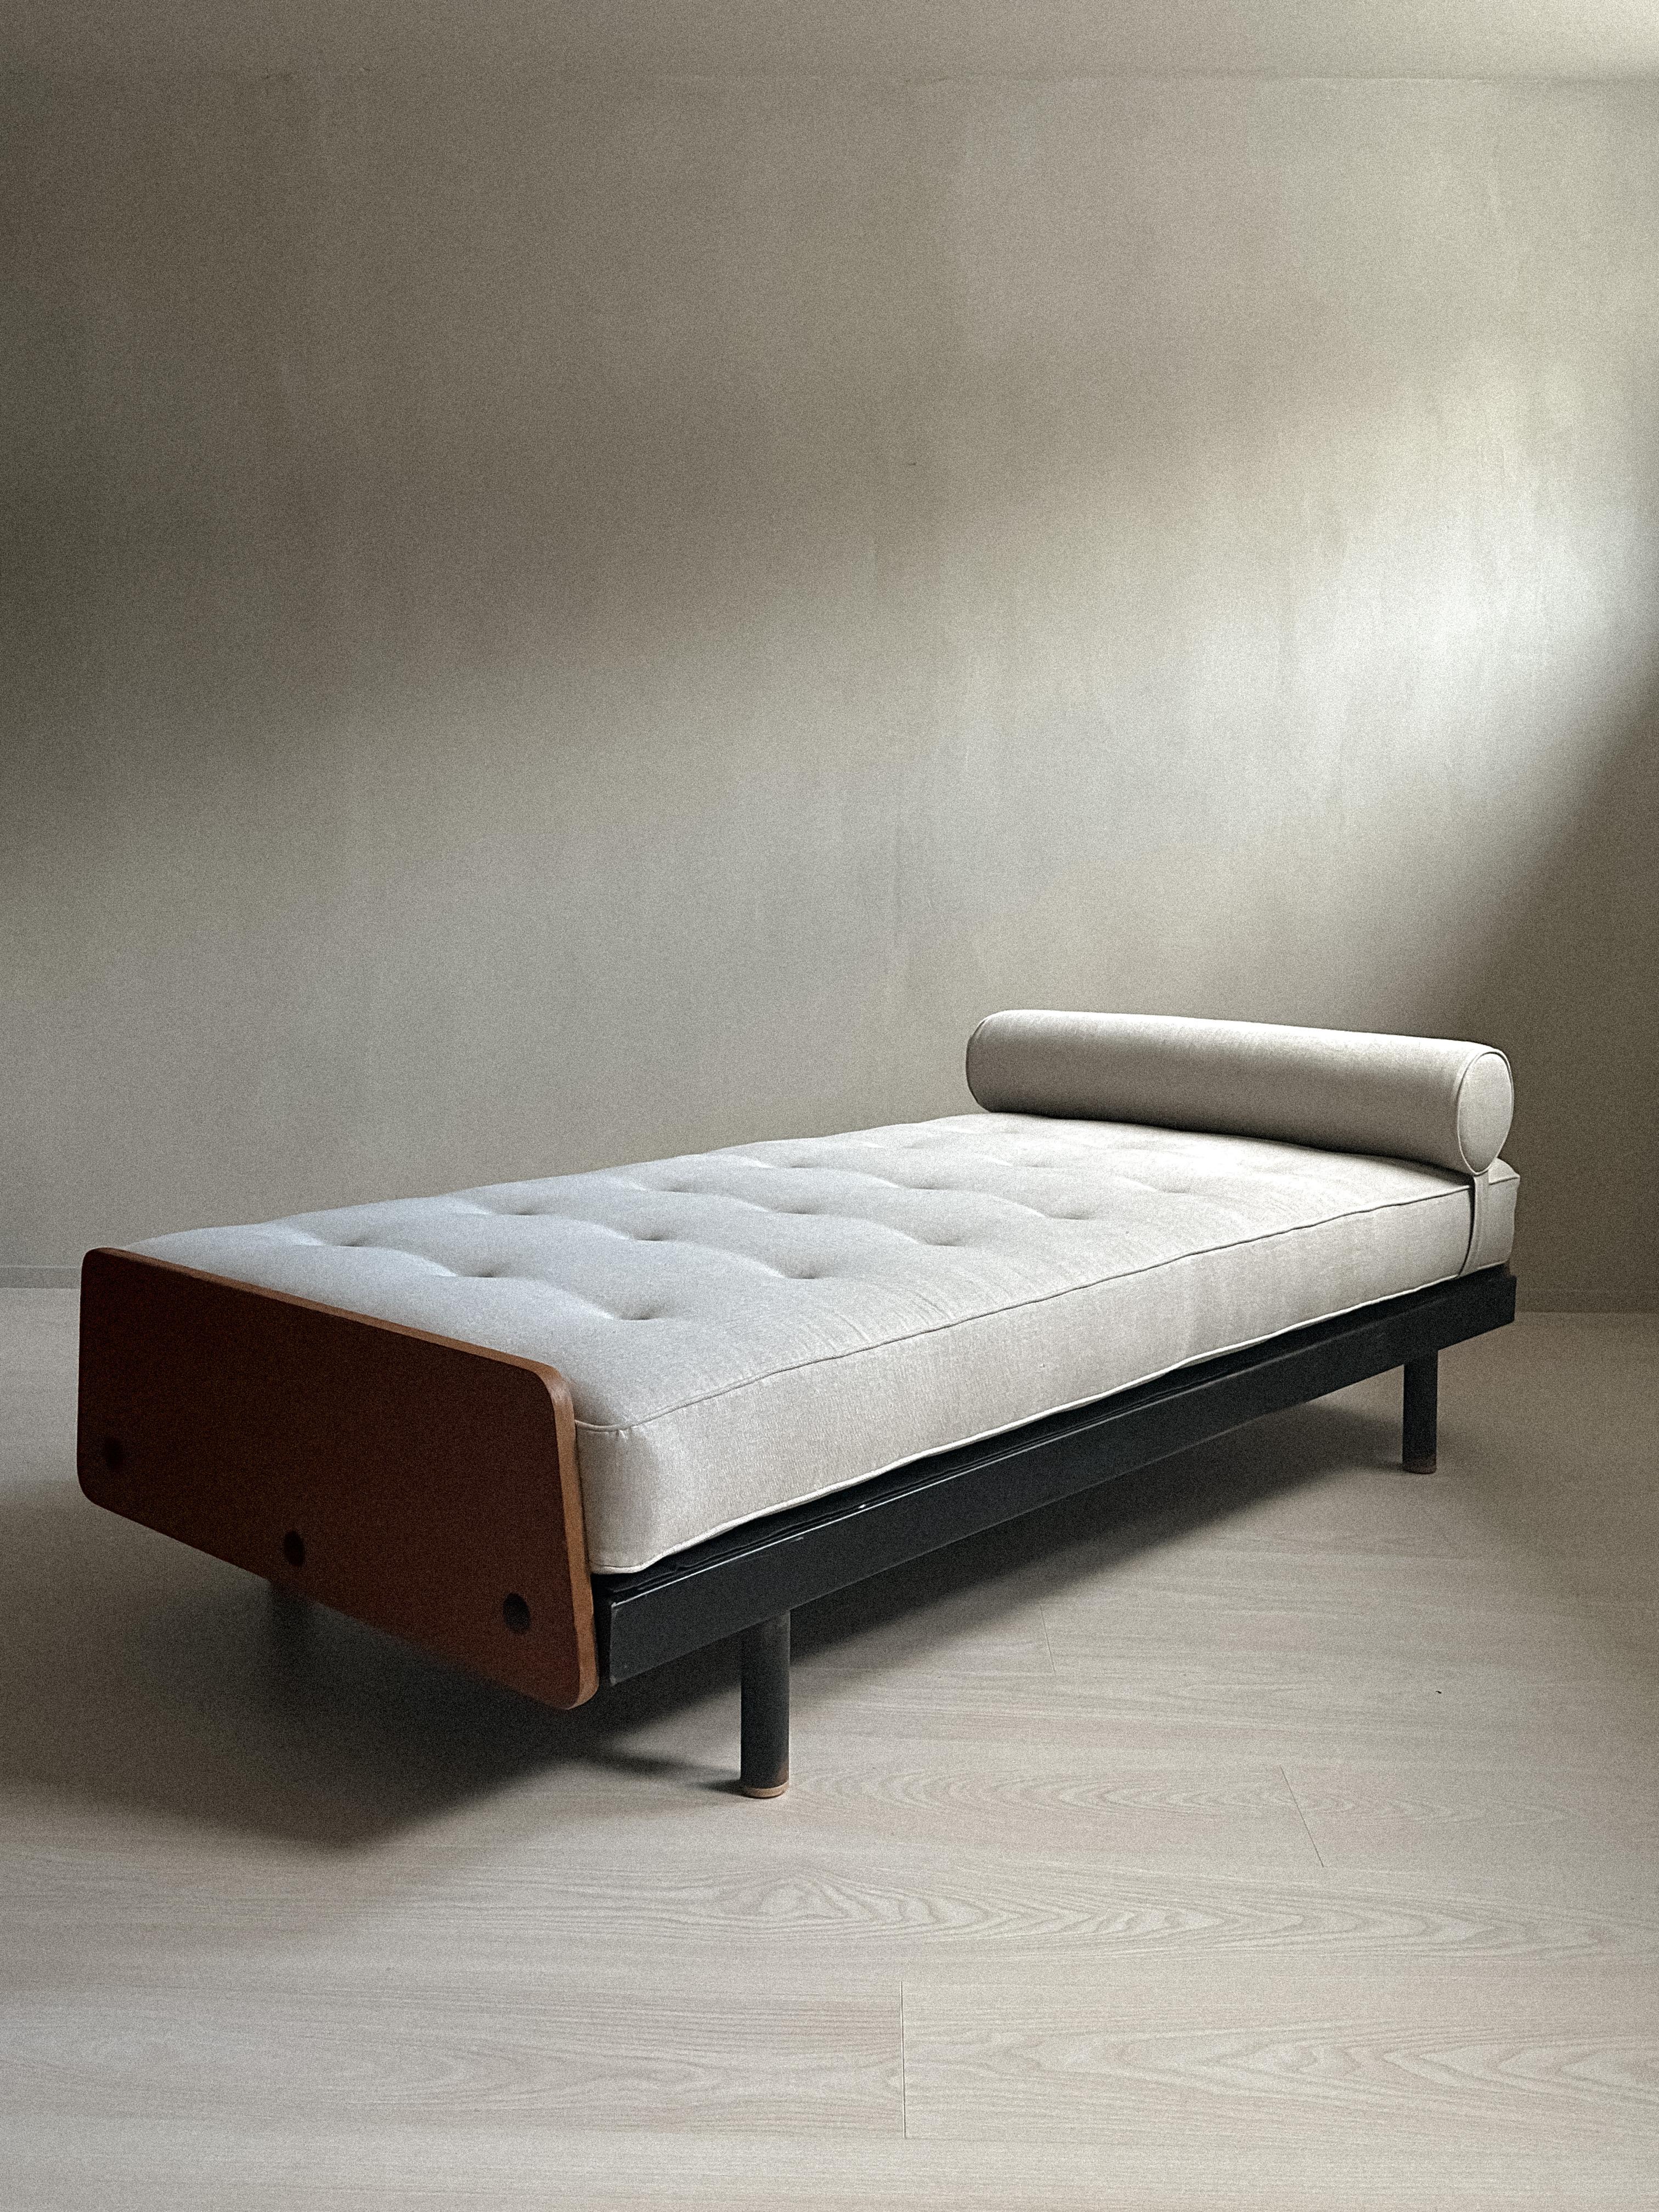 Introducing the stunning S.C.A.L daybed, designed by renowned French architect and designer, Jean Prouvé (1901-1984). This daybed is a perfect example of Prouvé's signature blend of functionality and style. The daybed is crafted with mahogany